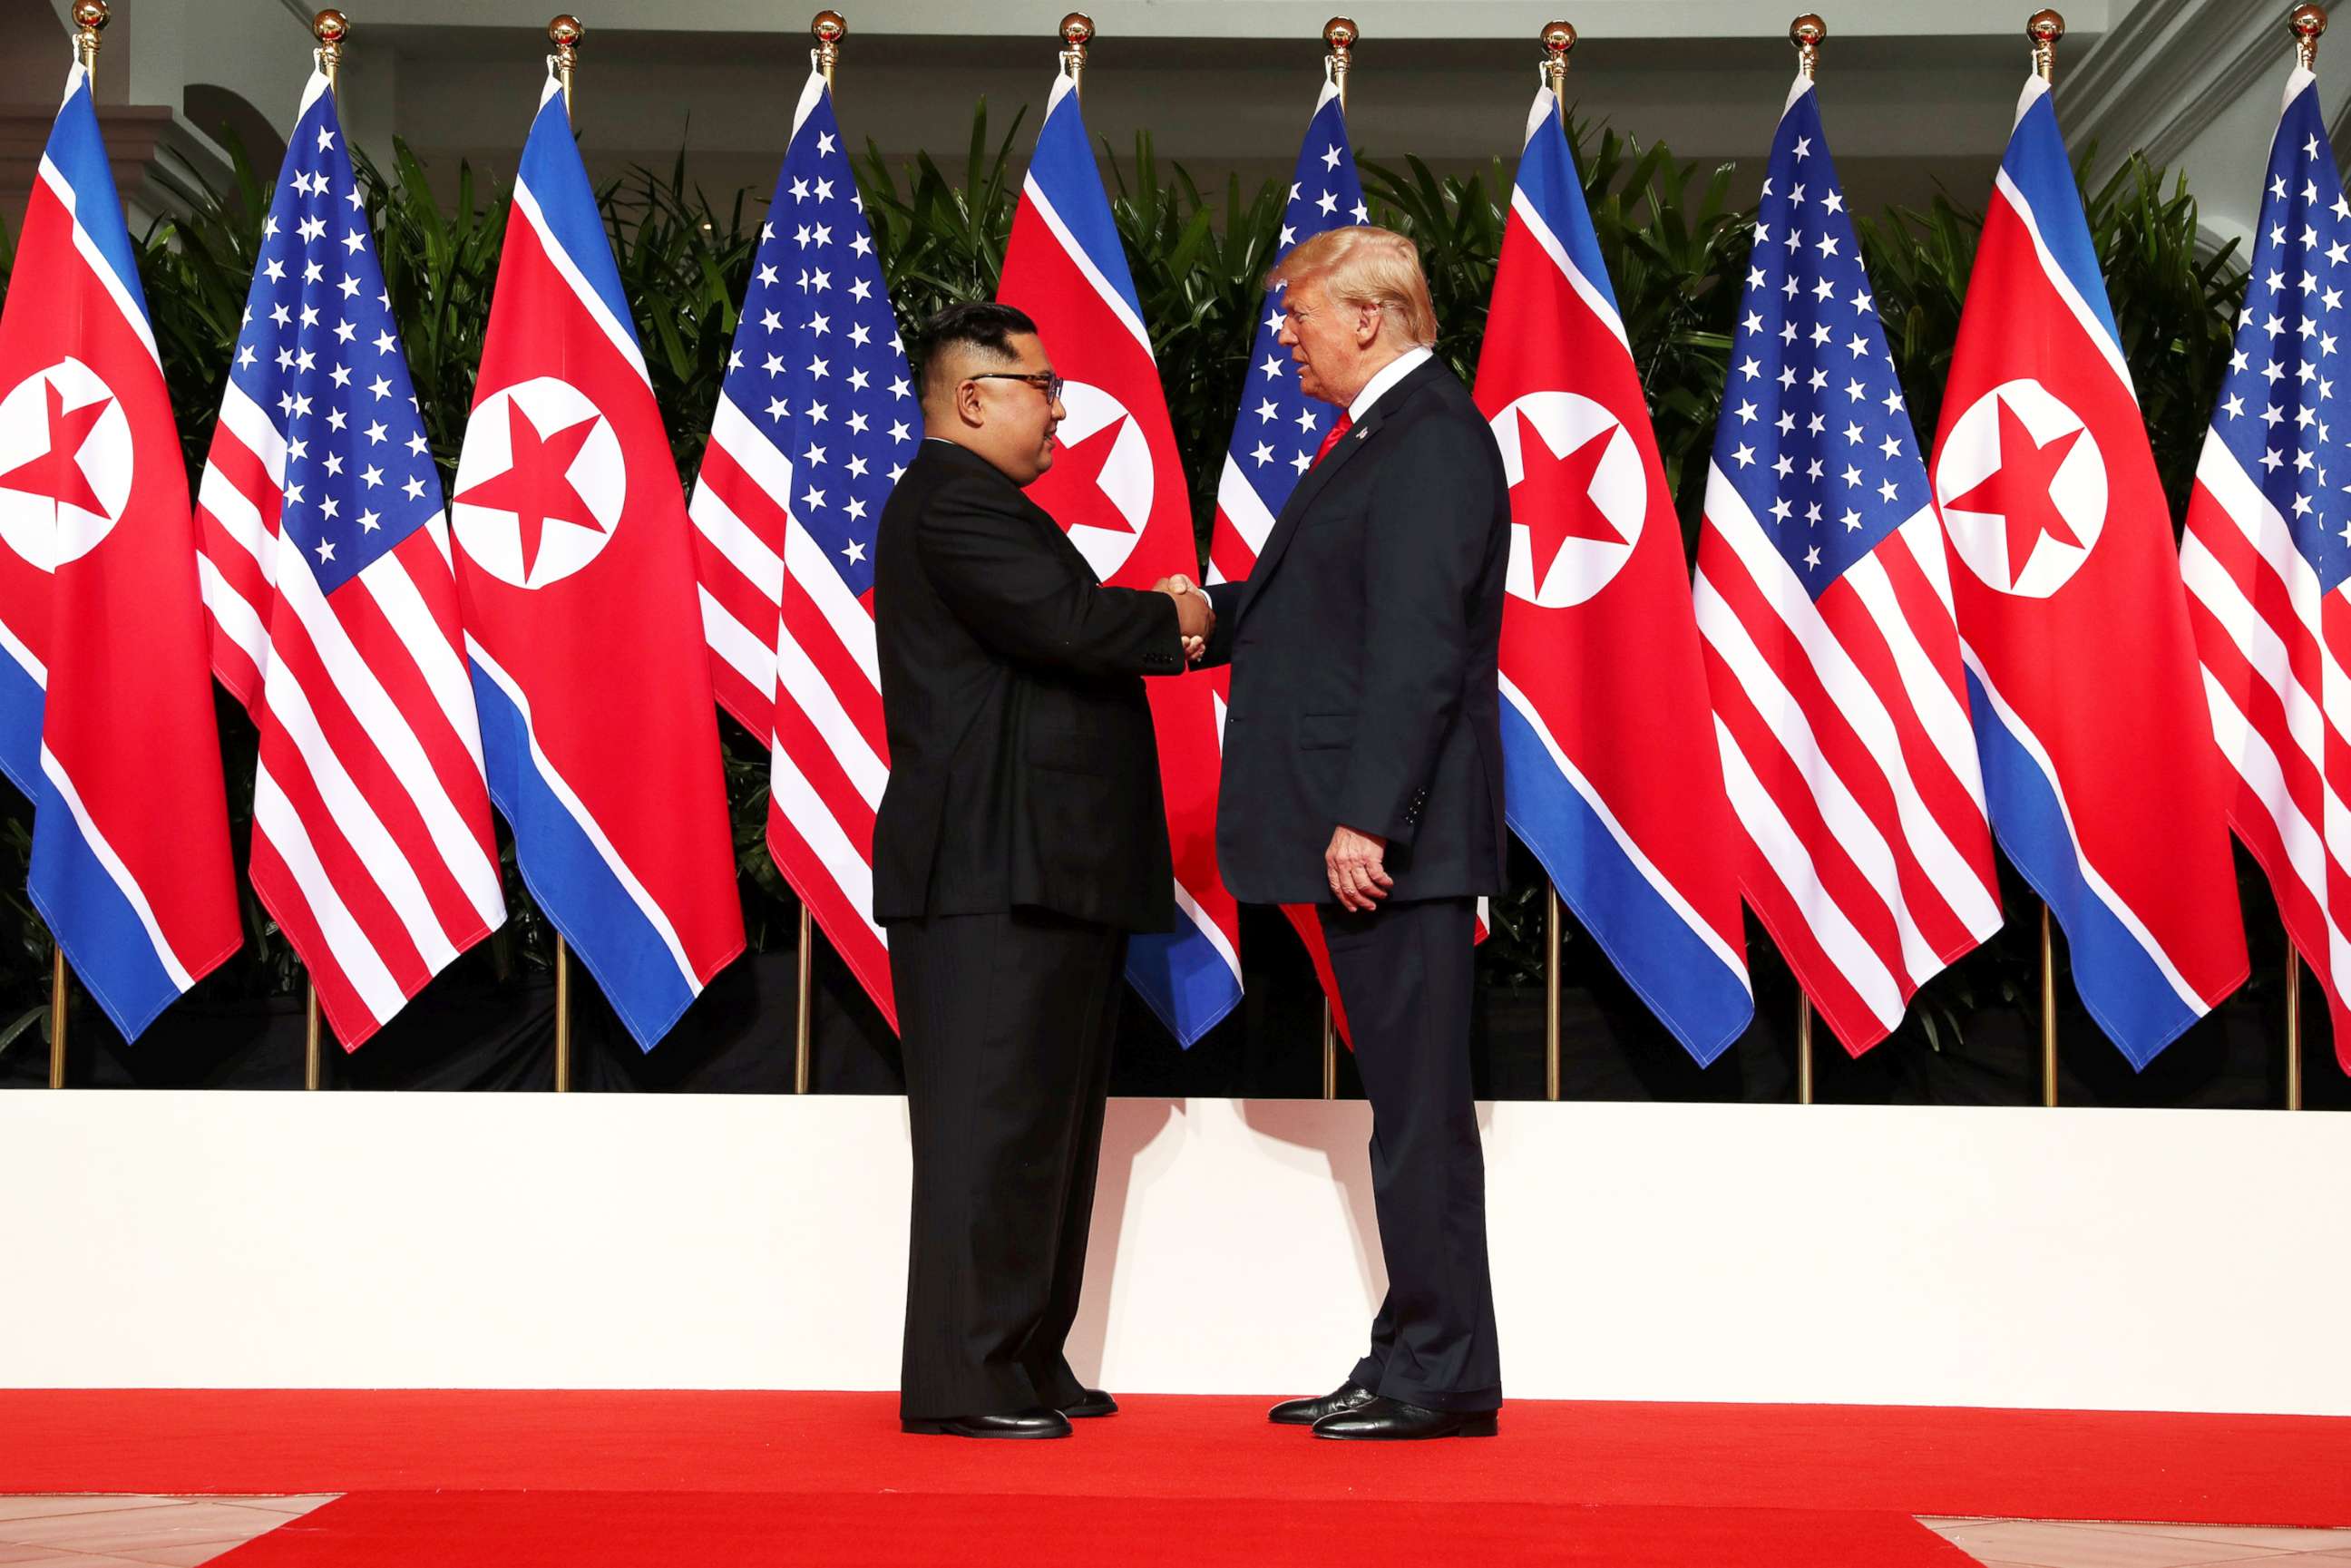 PHOTO: President Donald Trump shakes hands with North Korean leader Kim Jong Un at the Capella Hotel on Sentosa island in Singapore, June 12, 2018.